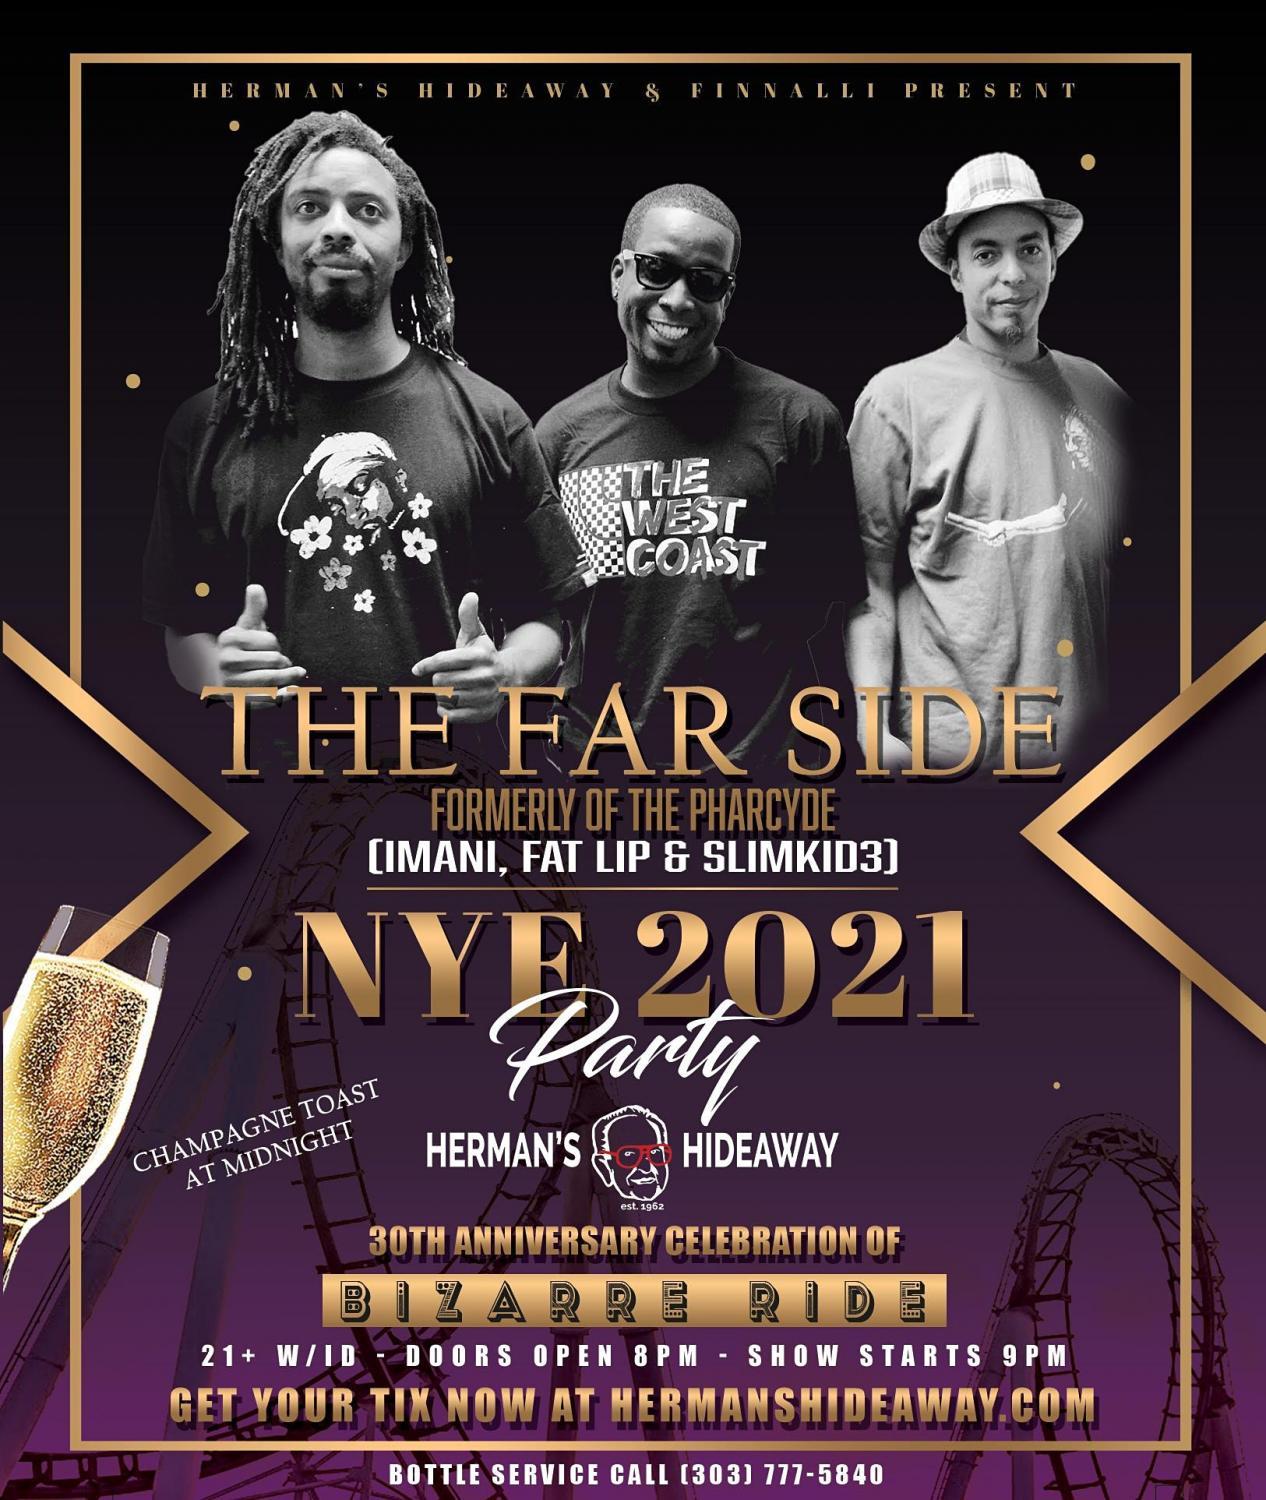 NEW YEARS PARTY WITH FAR SIDE (FORMERLY OF THE PHARCYDE)